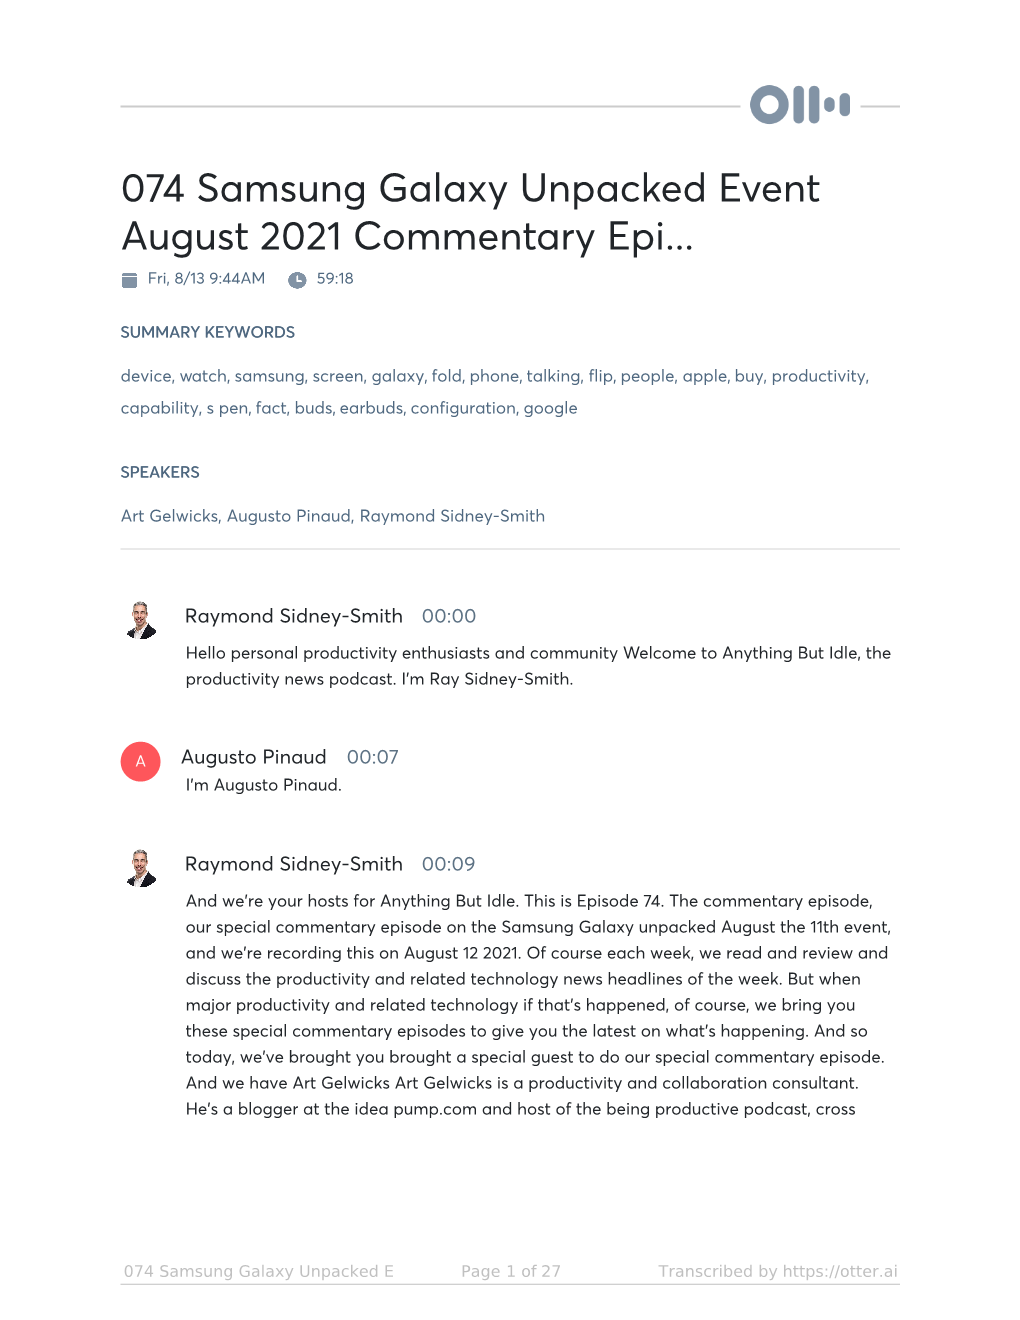 074 Samsung Galaxy Unpacked Event August 2021 Commentary Epi... Fri, 8/13 9:44AM 59:18